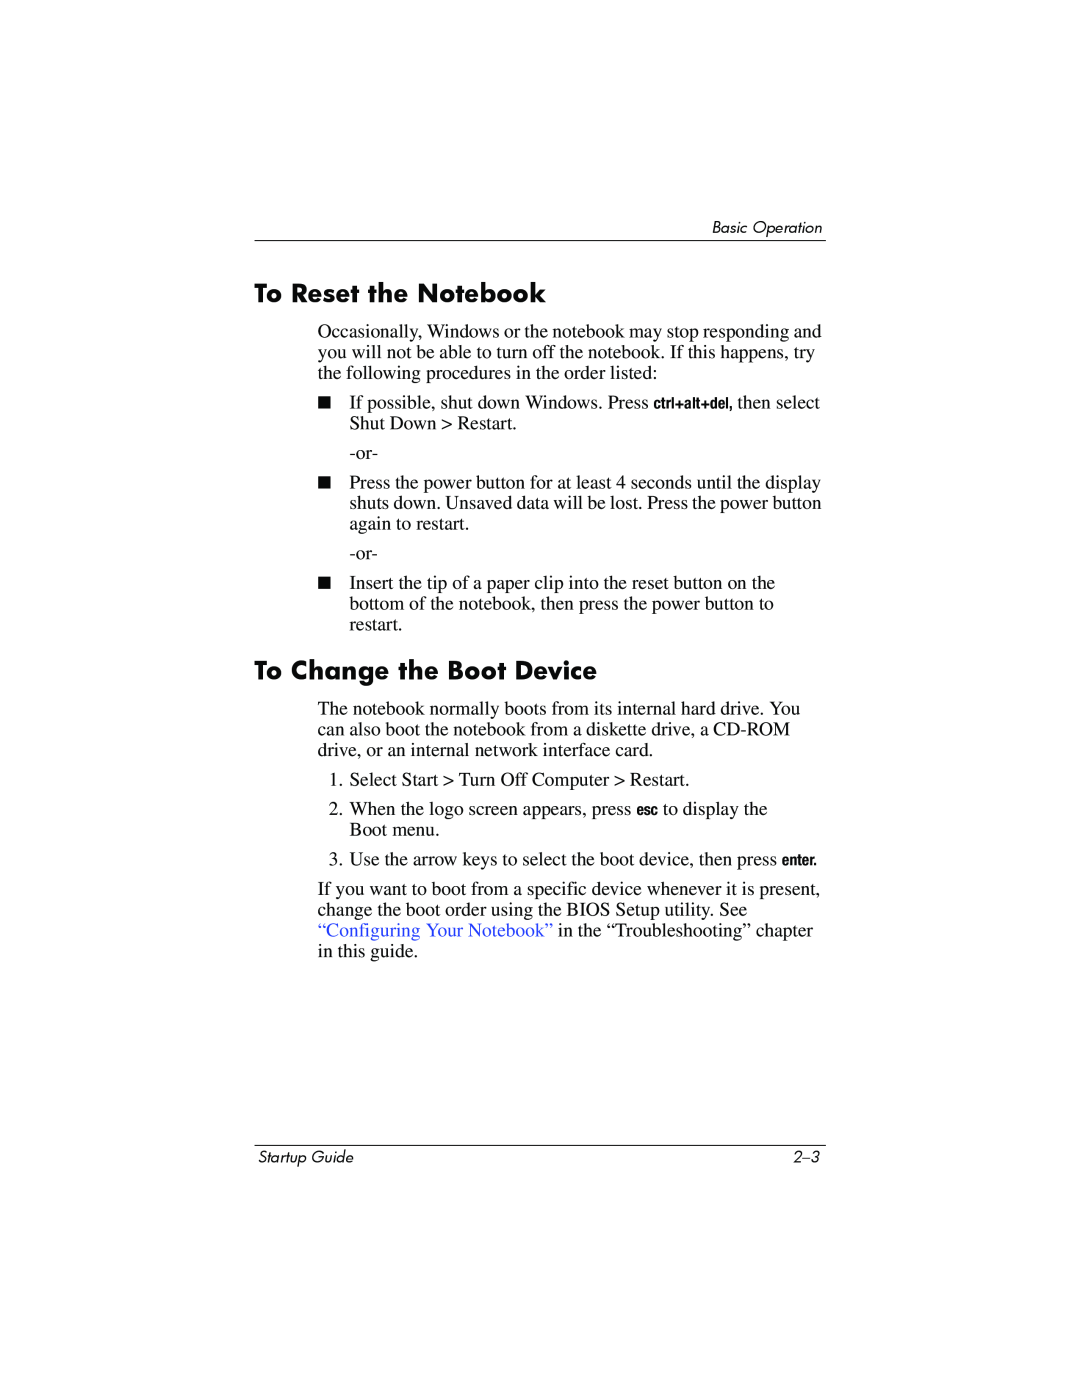 Compaq Personal Computer manual To Reset the Notebook, To Change the Boot Device 